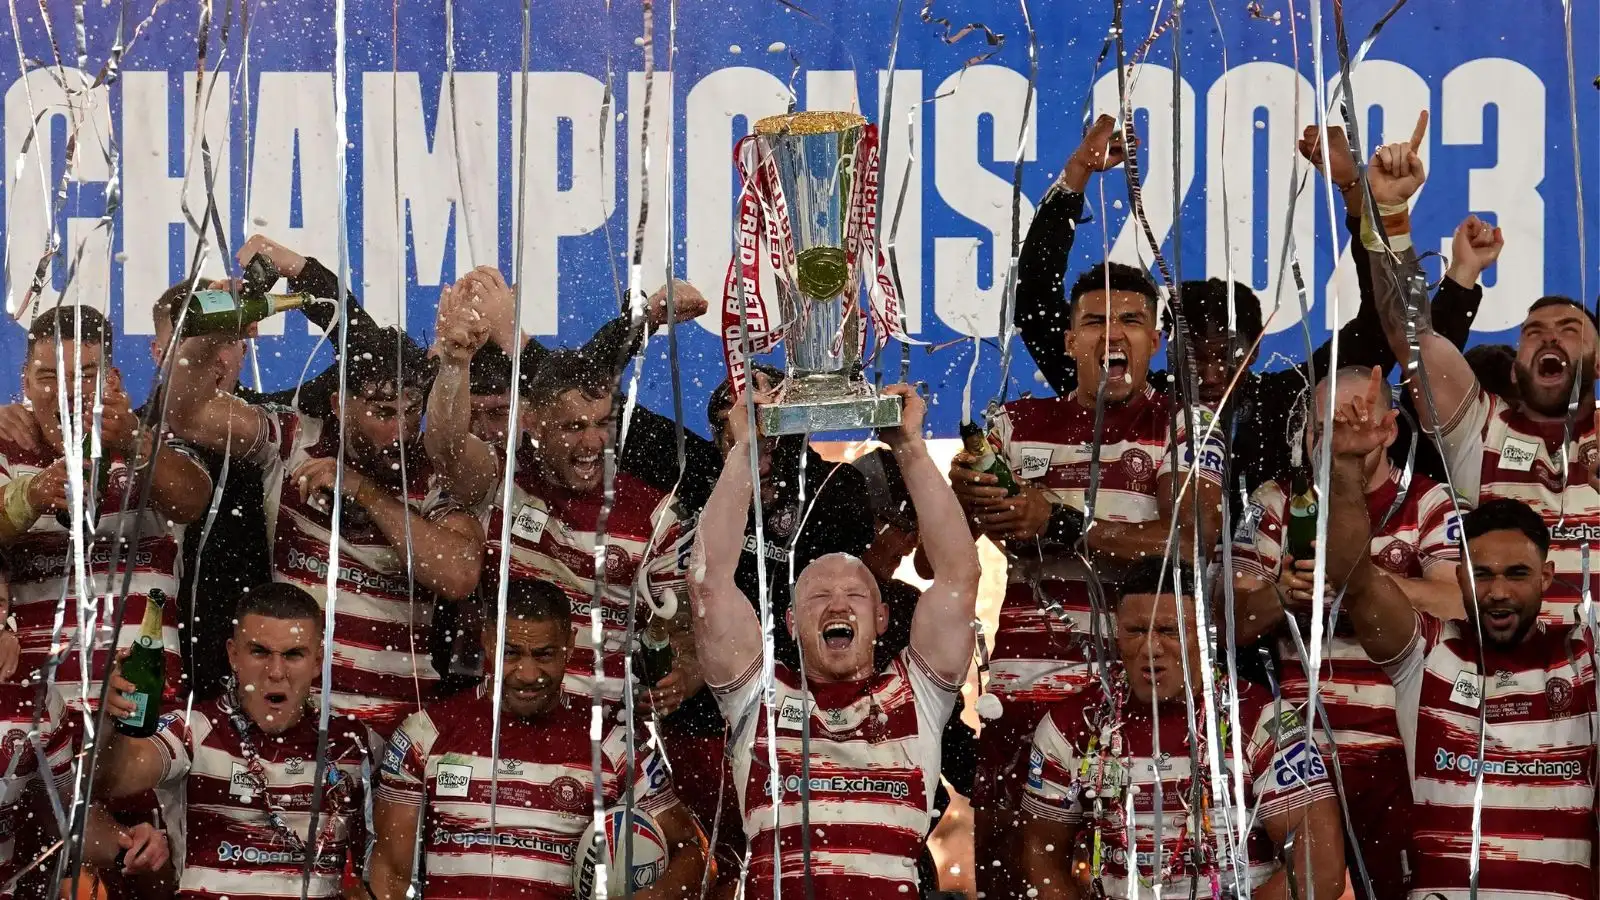 The five reasons behind Wigan Warriors’ Grand Final win and the start of a new dynasty